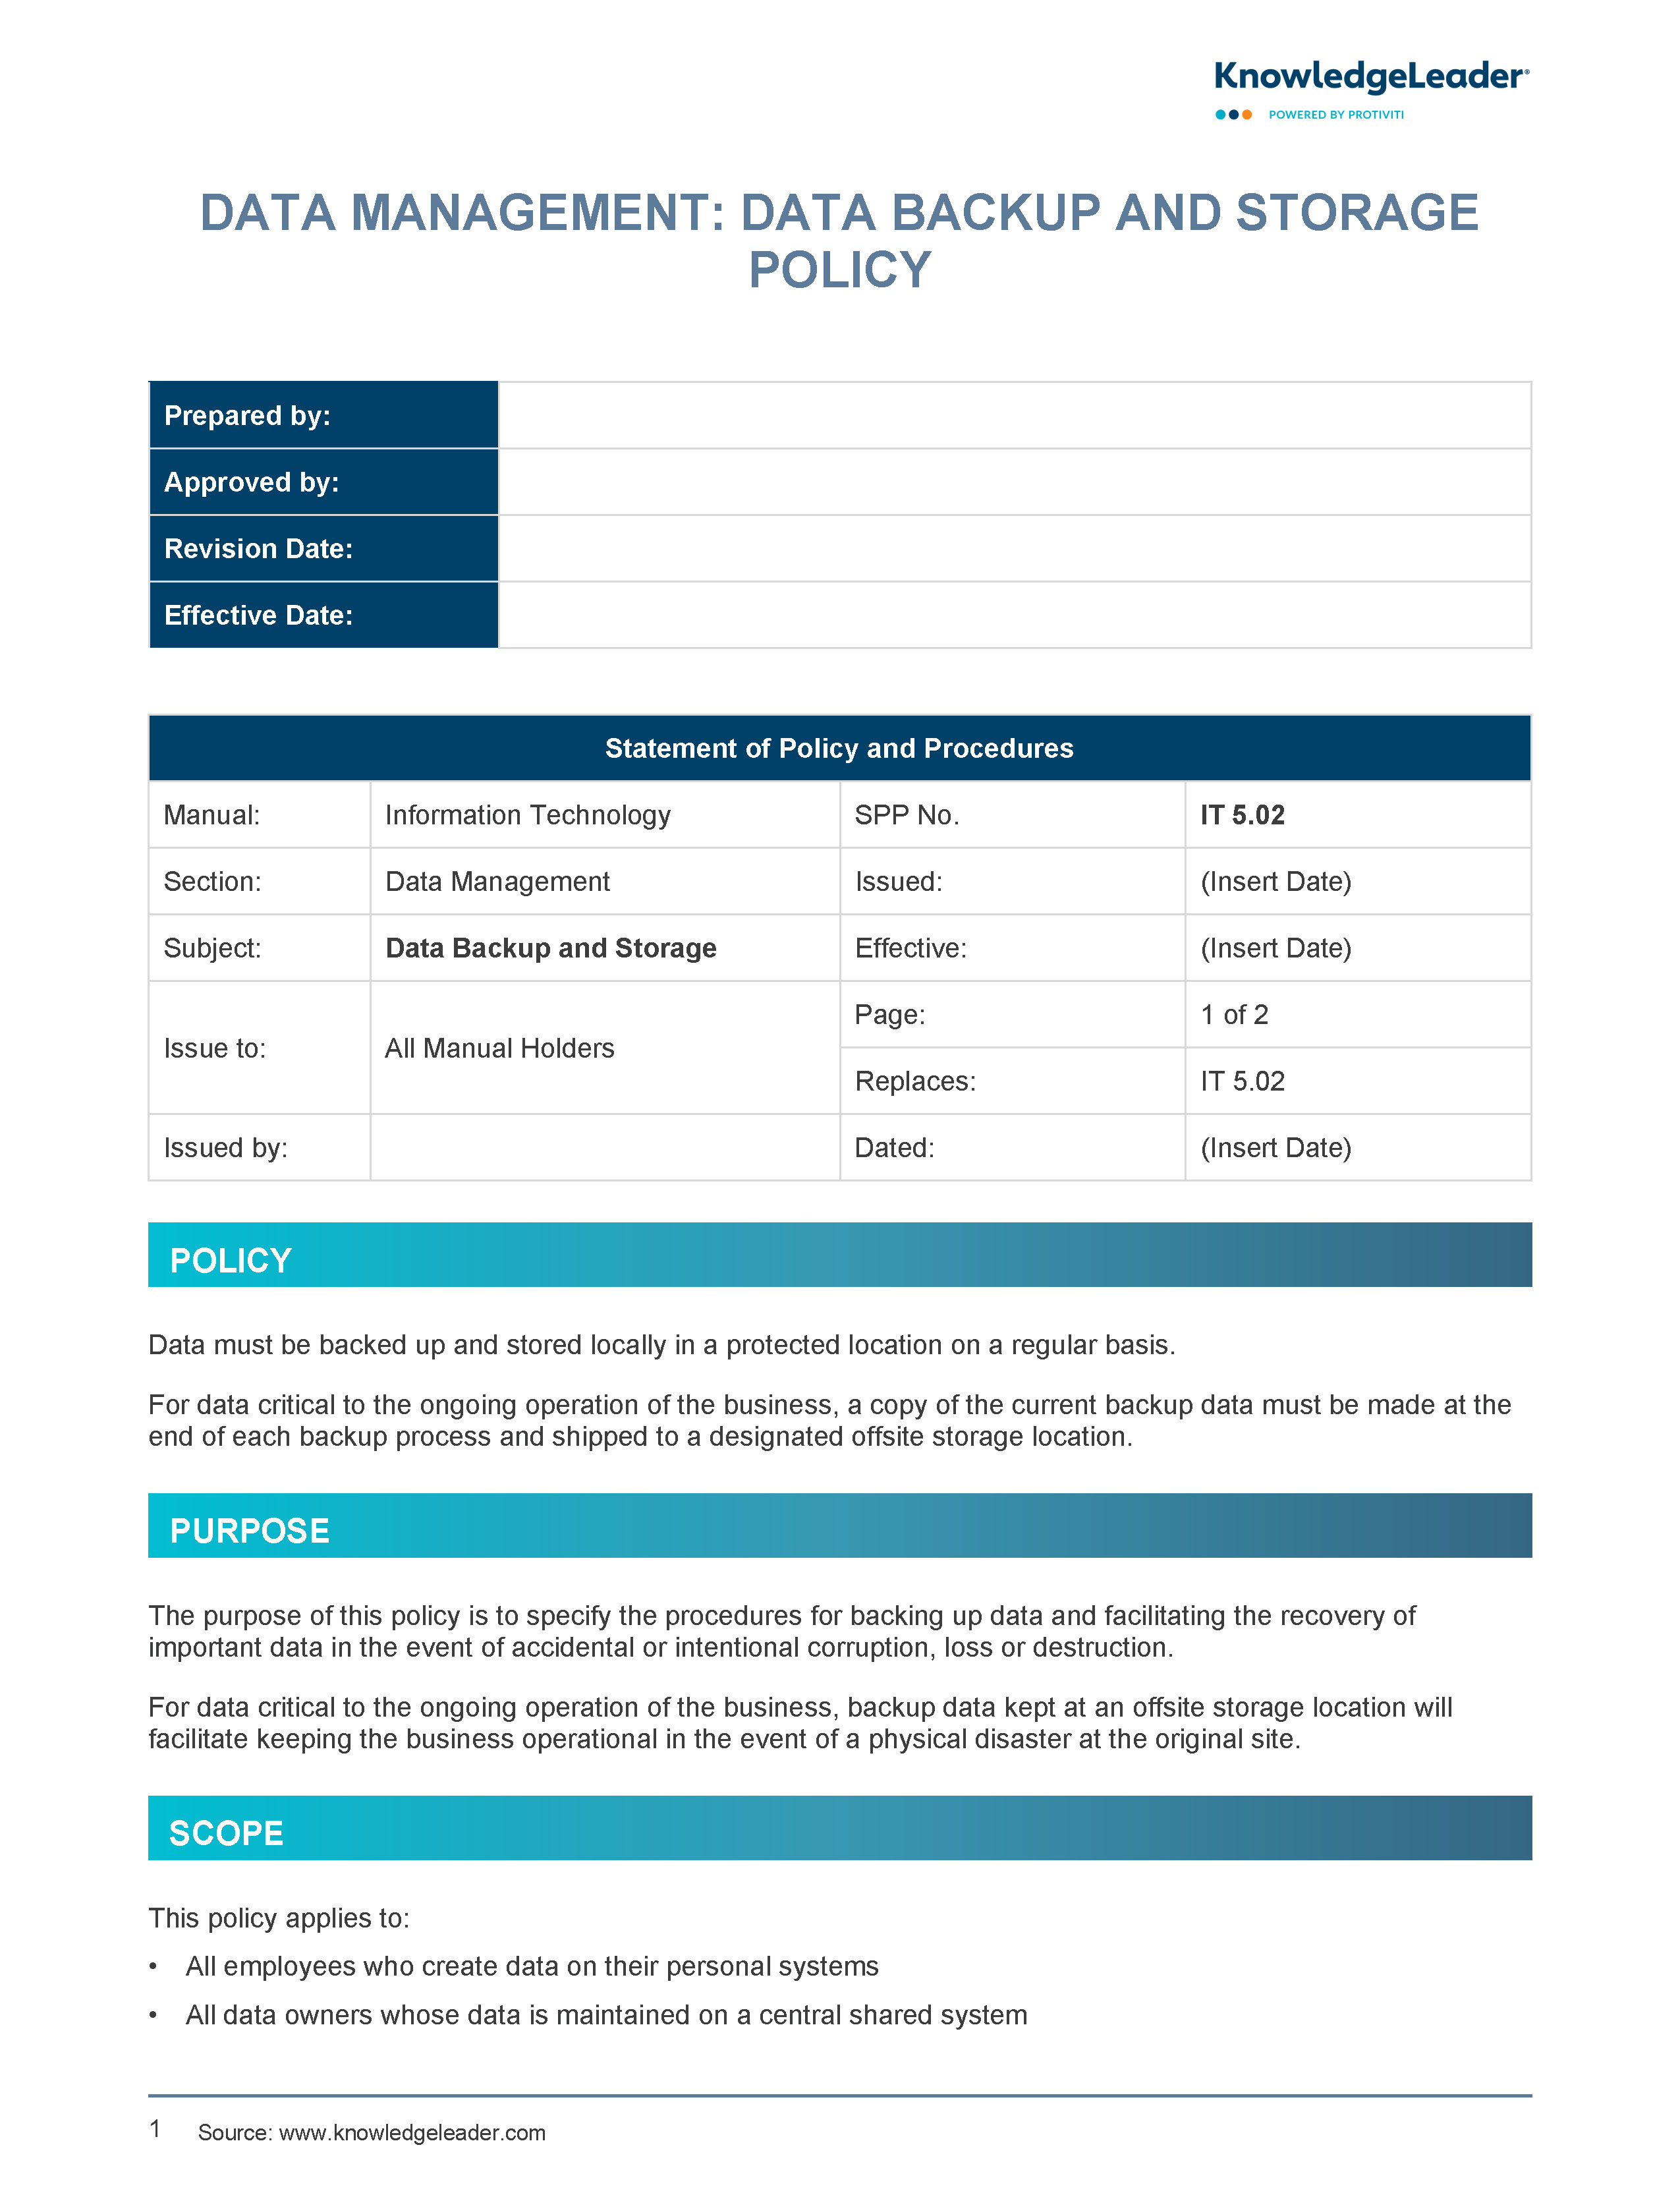 Screenshot of the first page of Data Management - Data Backup and Storage Policy